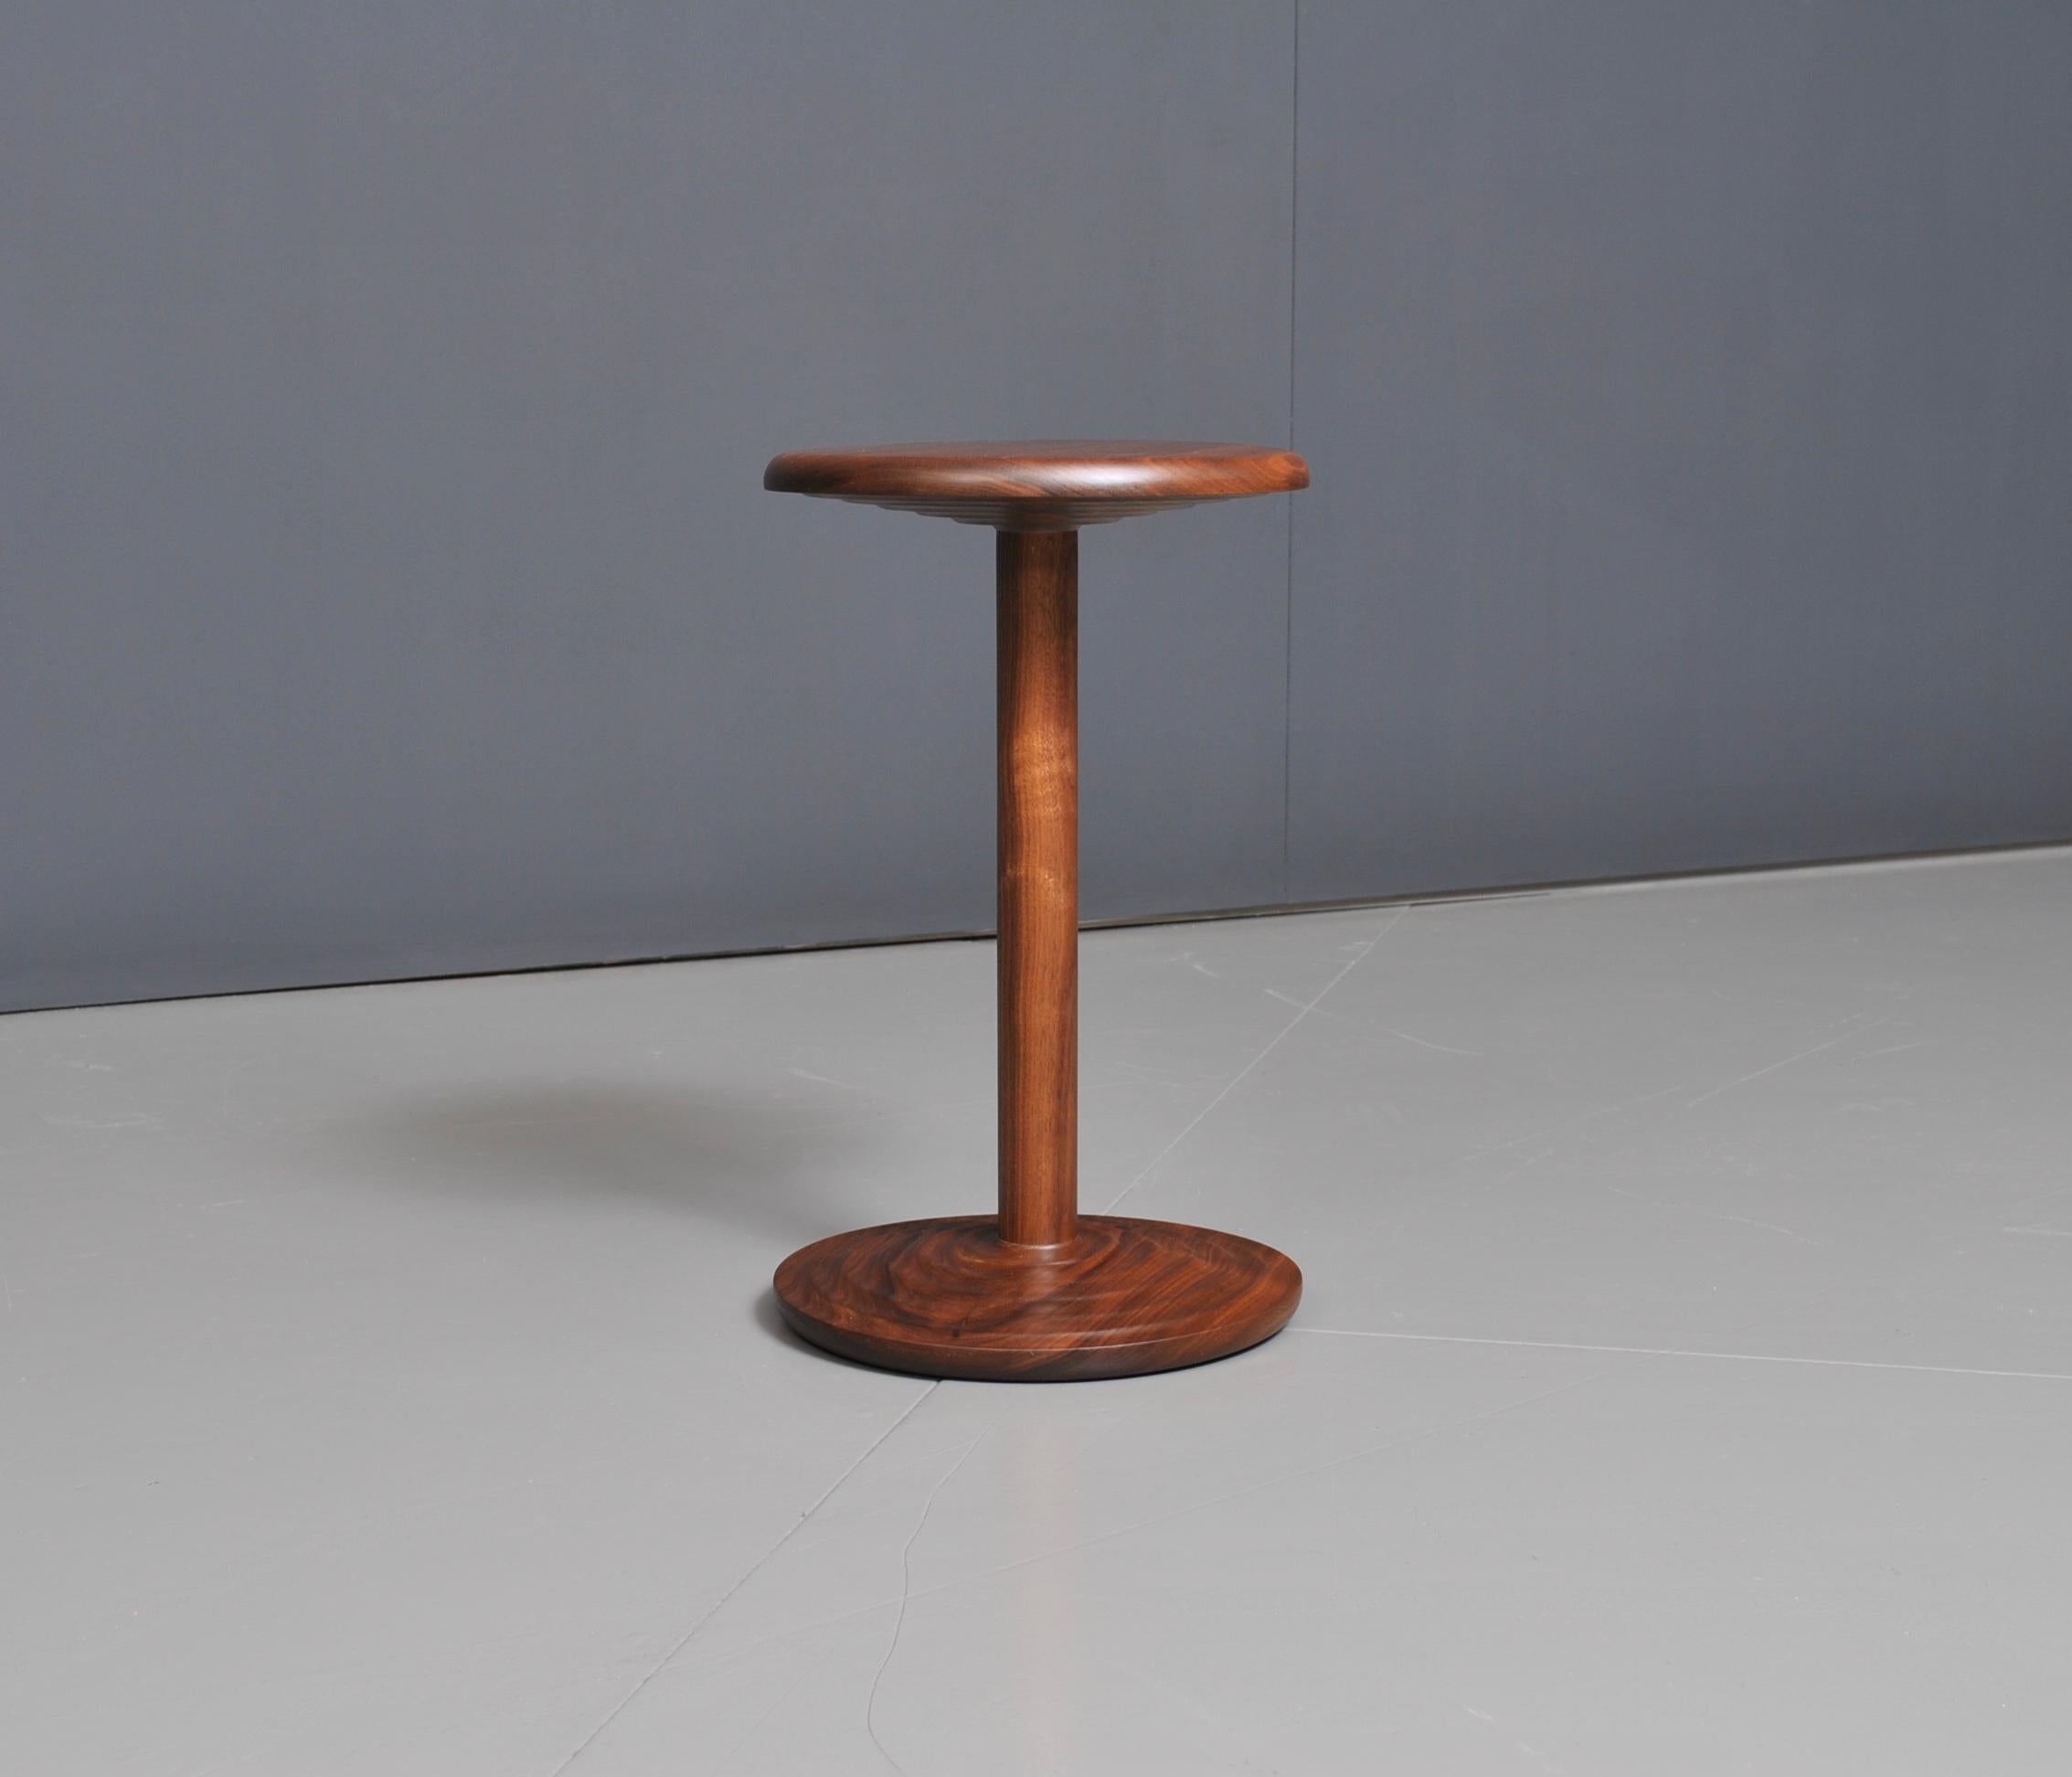 Beautifully turned and handcrafted walnut side table in modernist midcentury design. Perfect in form and scale. This is a bespoke piece of the fine quality, handmade by master-craftsman in the UK using American black walnut. Hand finished with water